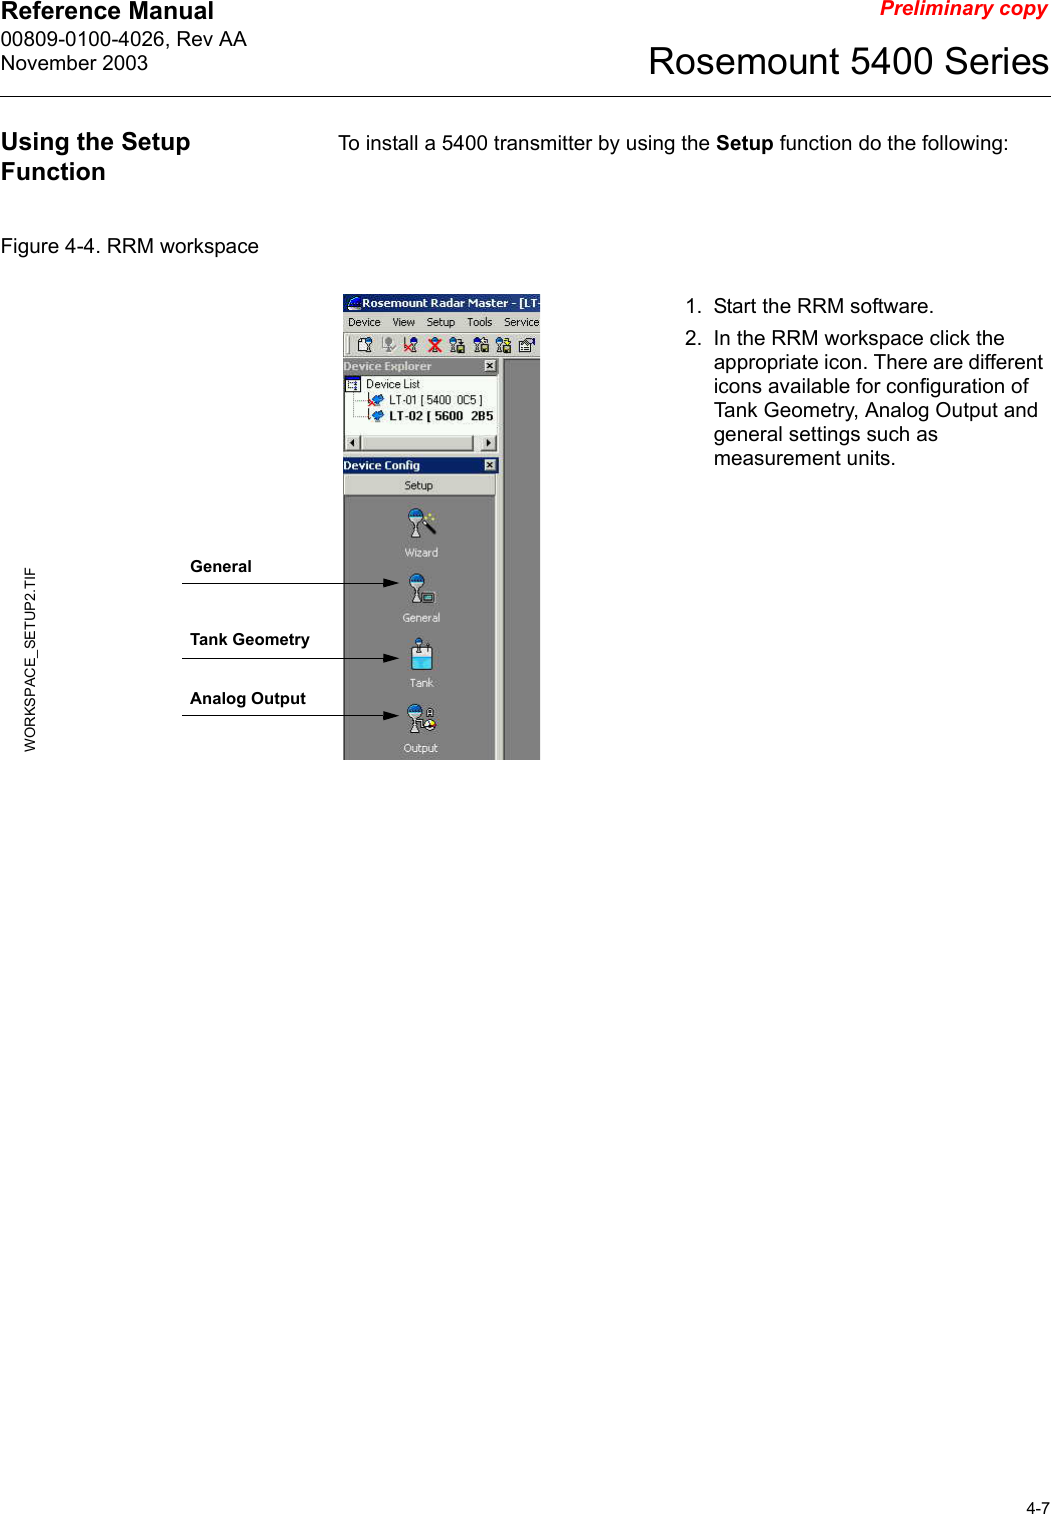 Reference Manual 00809-0100-4026, Rev AANovember 20034-7Rosemount 5400 SeriesPreliminary copyUsing the Setup FunctionTo install a 5400 transmitter by using the Setup function do the following:Figure 4-4. RRM workspace1. Start the RRM software.2. In the RRM workspace click the appropriate icon. There are different icons available for configuration of Tank Geometry, Analog Output and general settings such as measurement units.WORKSPACE_SETUP2.TIFGeneralTank GeometryAnalog Output